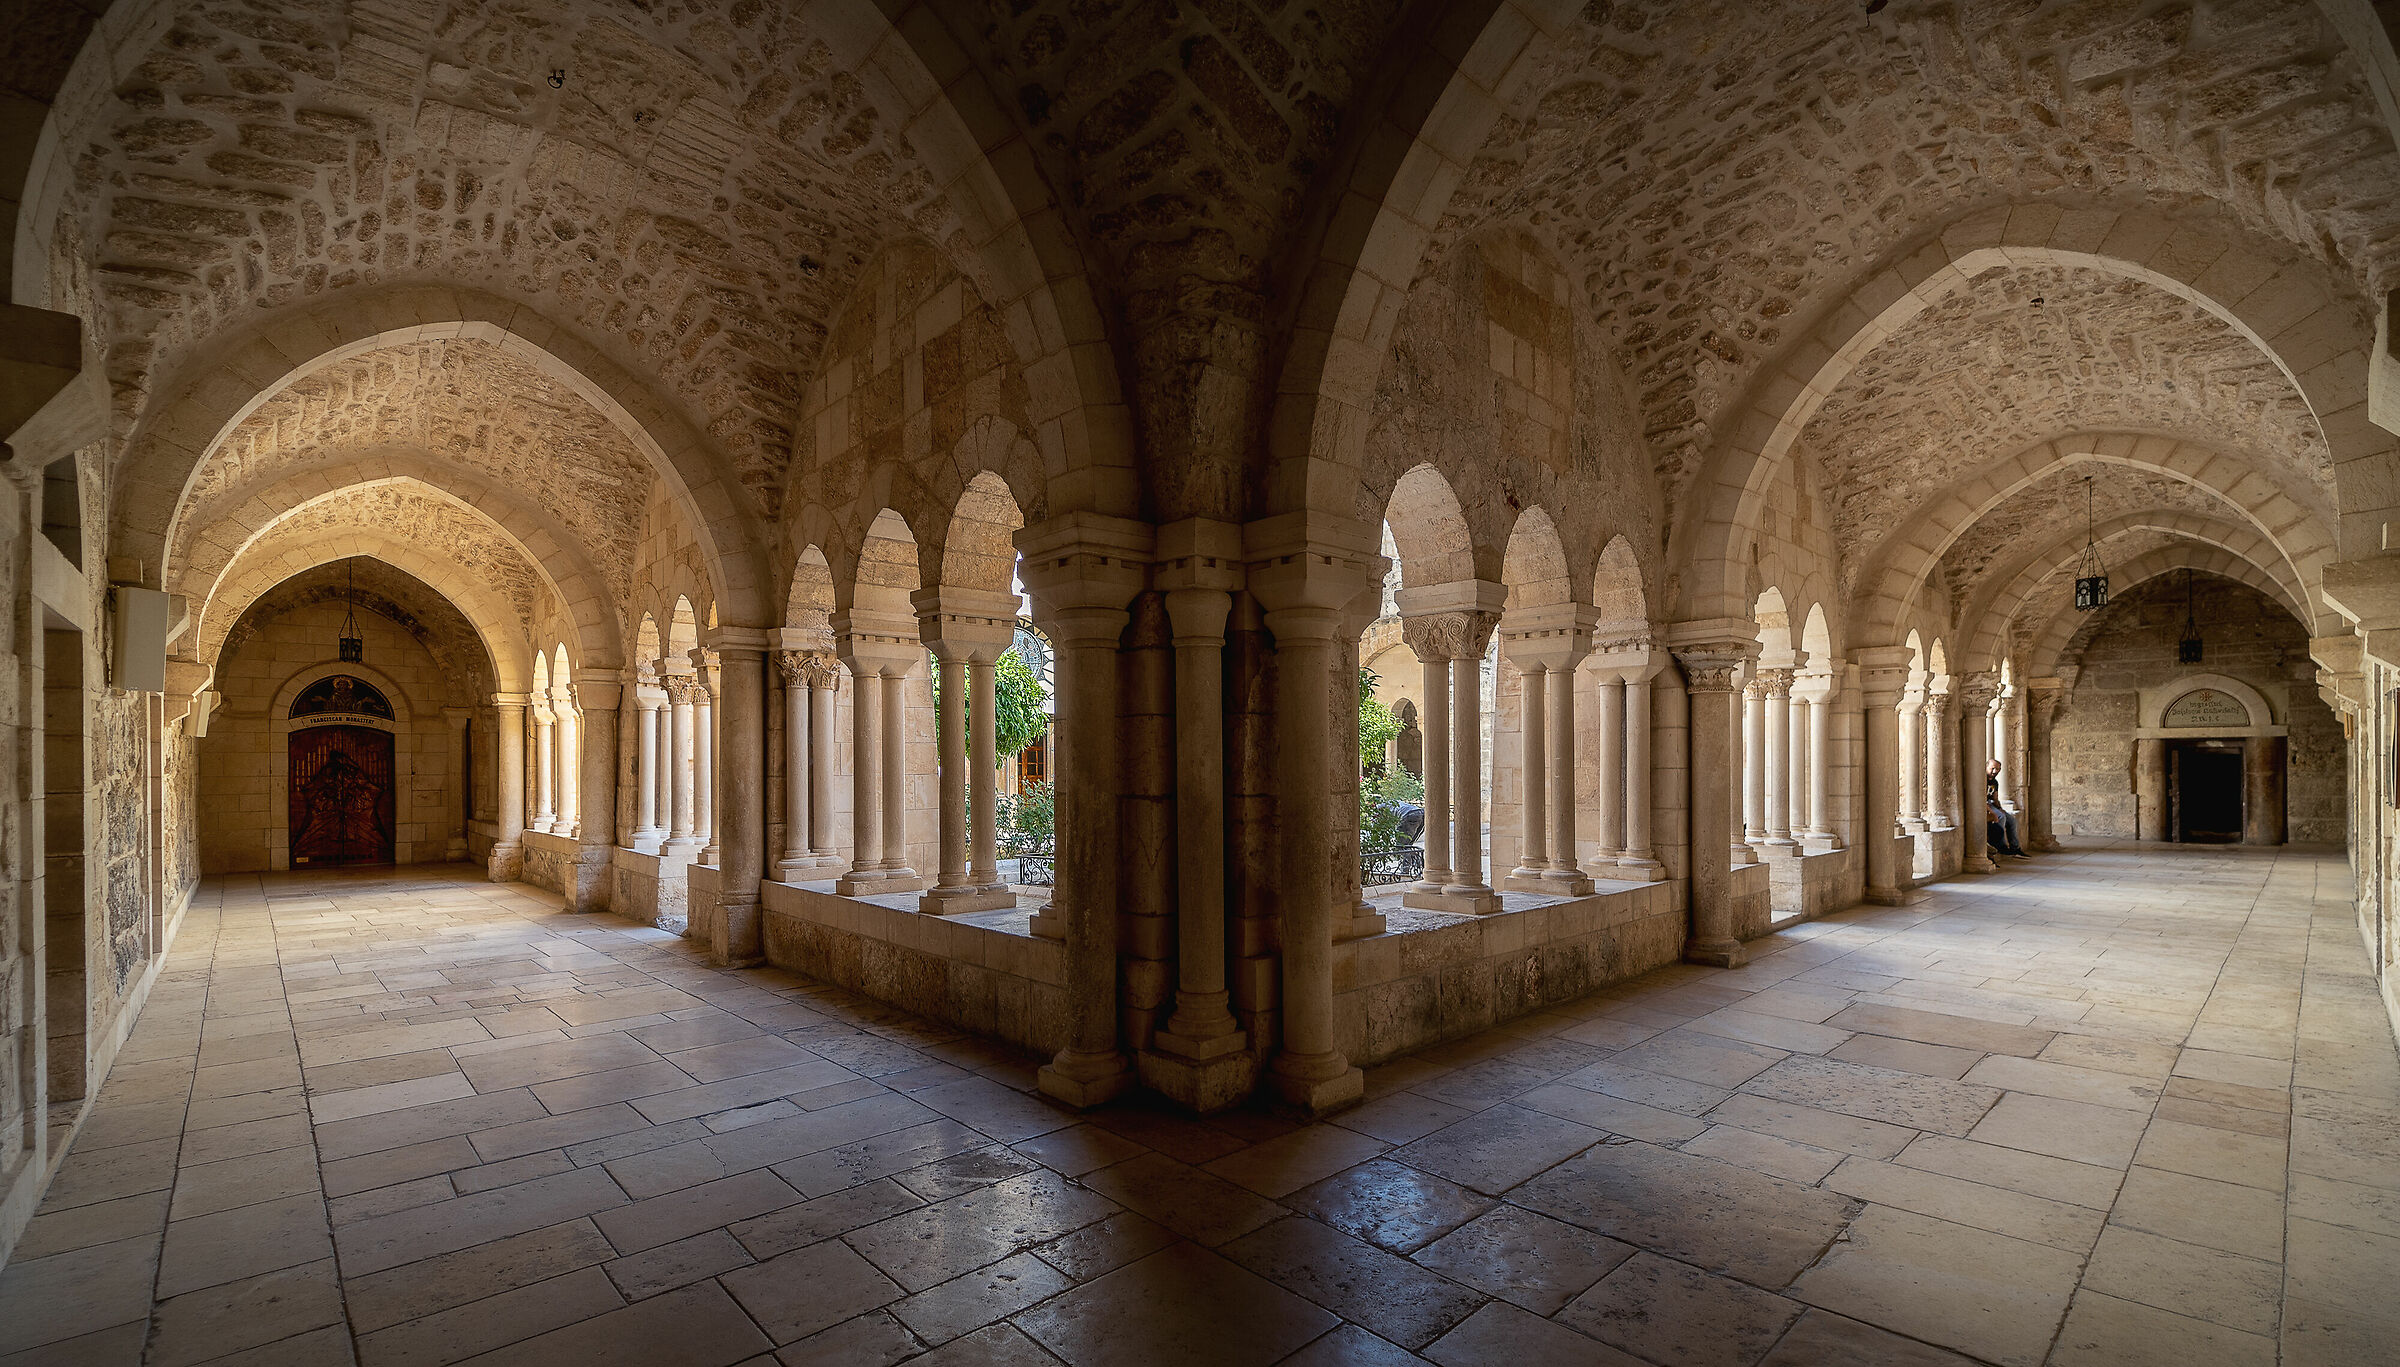 The cloister of the Church of St. Catherine...